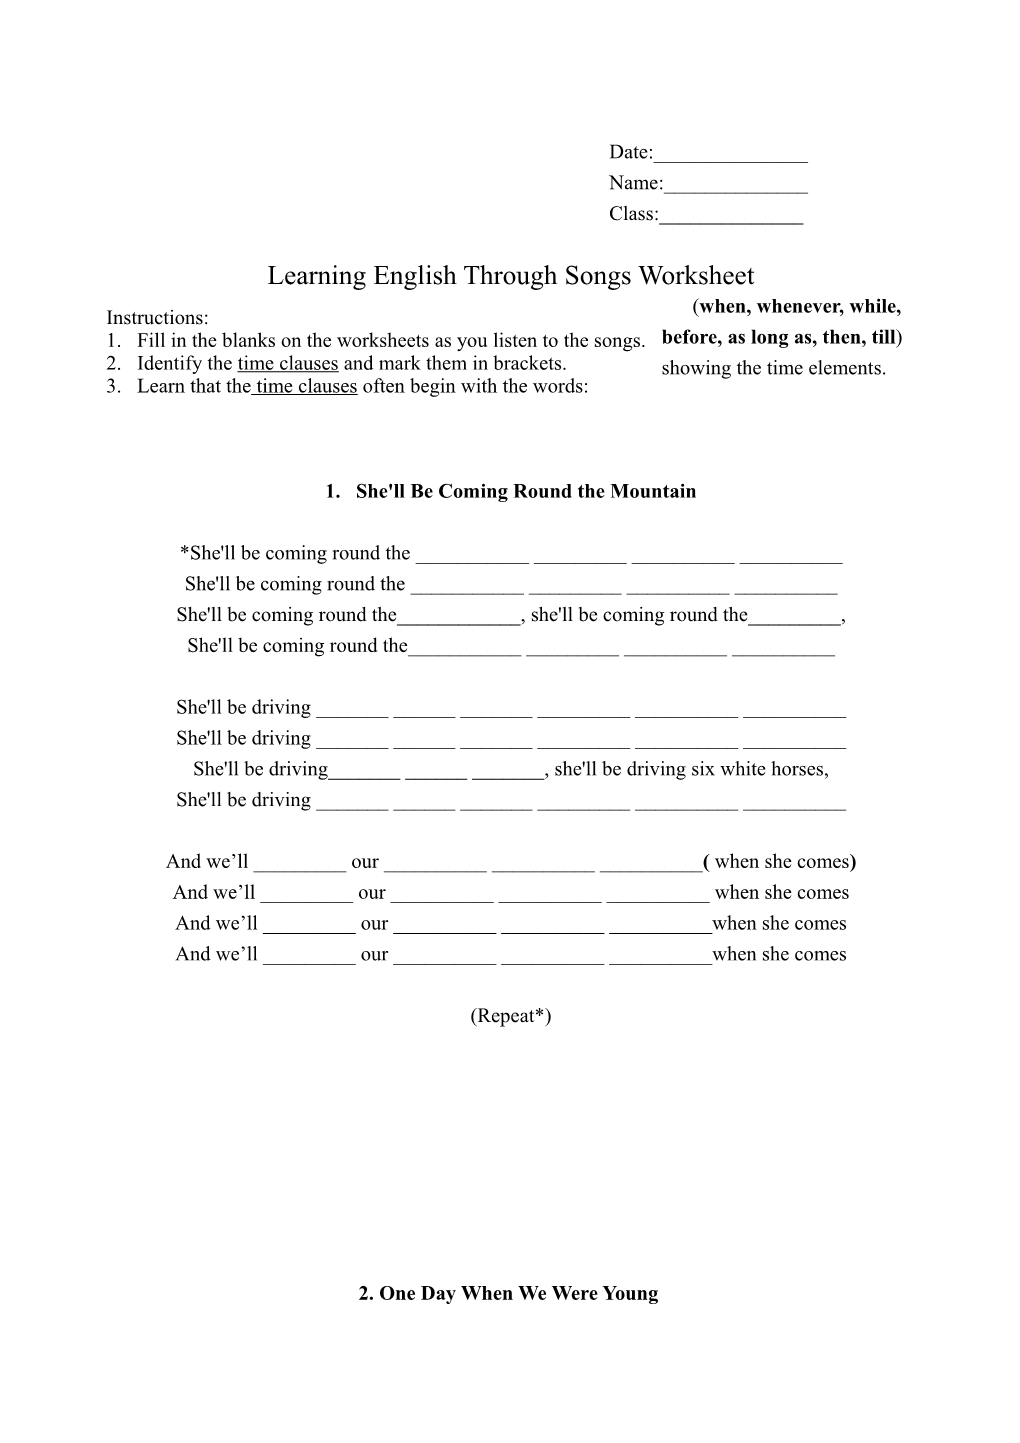 Learning English Through Songs Listen to the Song Worksheet